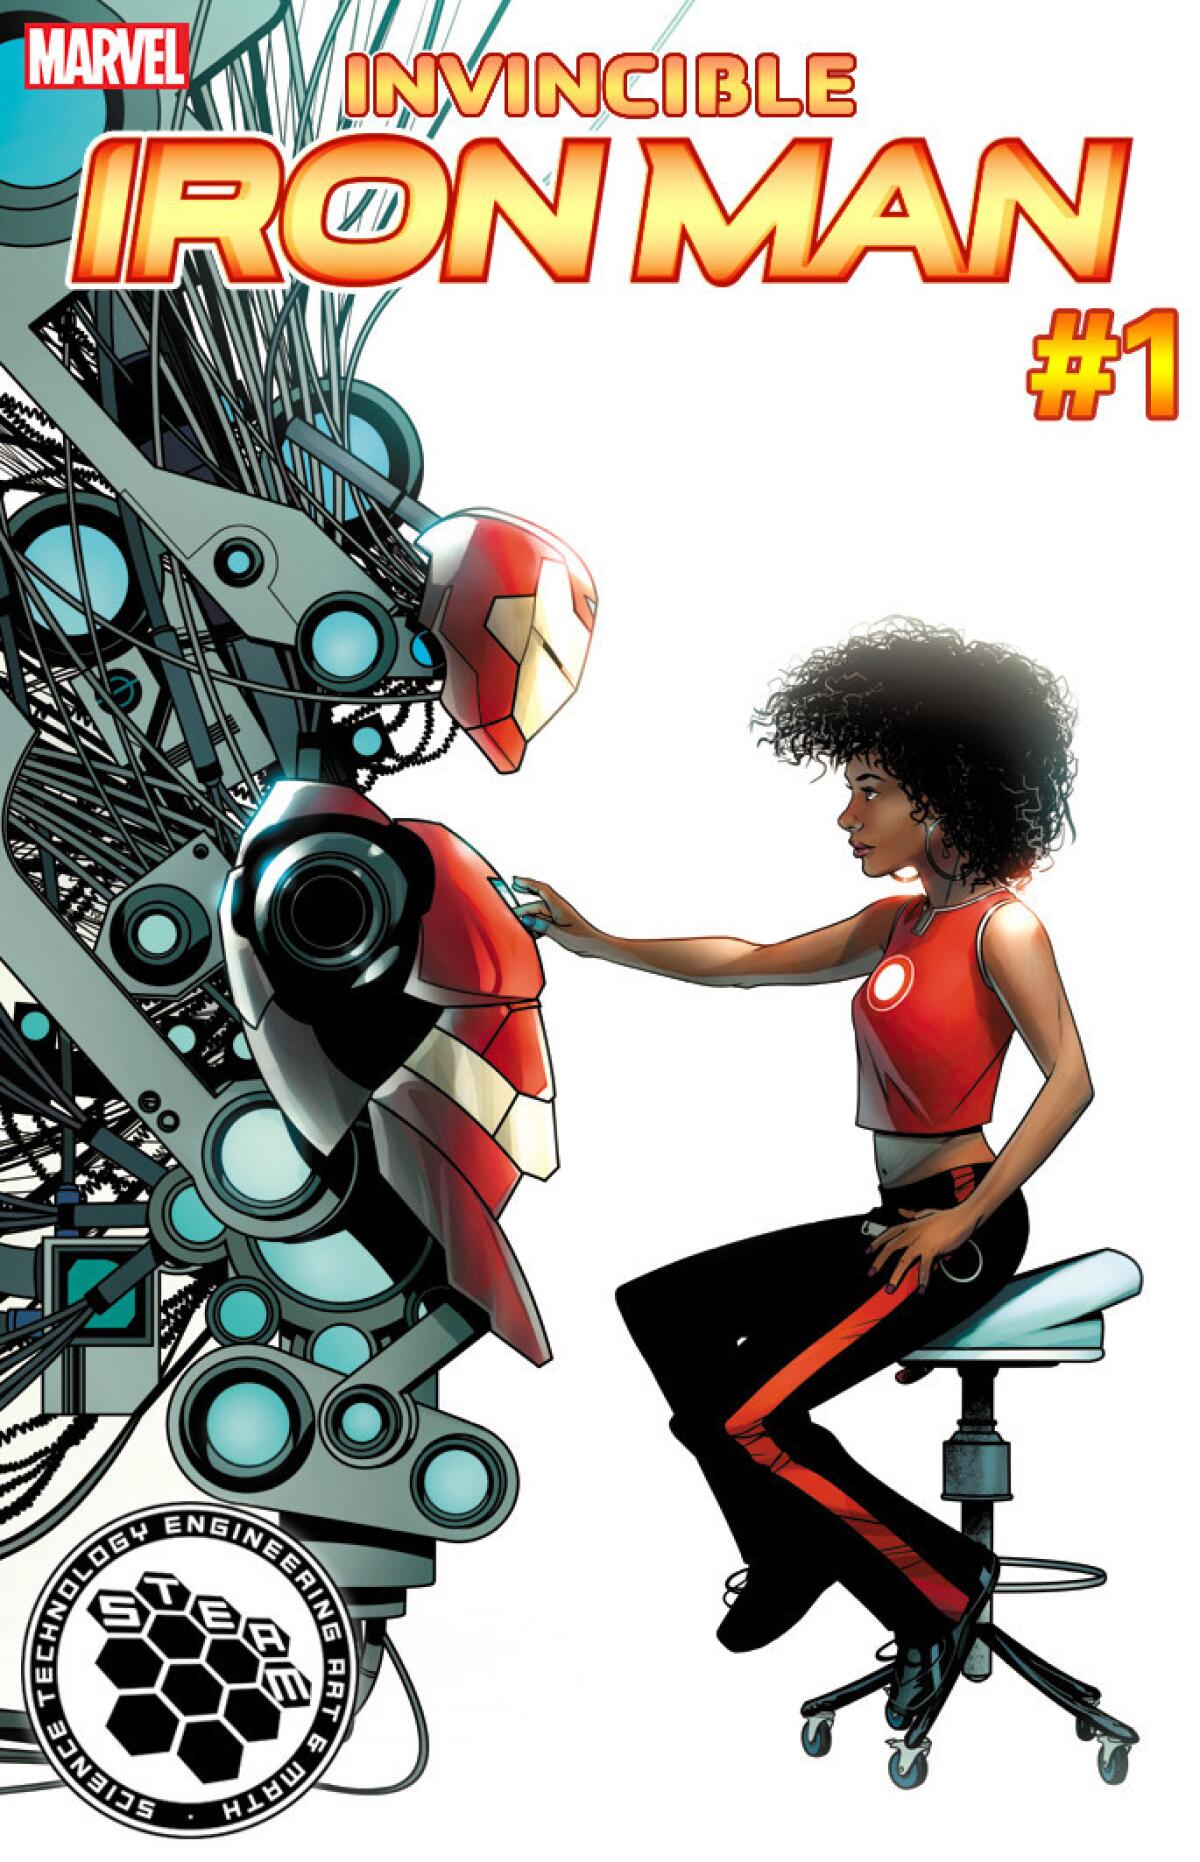 "Invincible Iron Man" No. 1 STEAM variant cover (engineering) by Mike McKone. (Marvel)